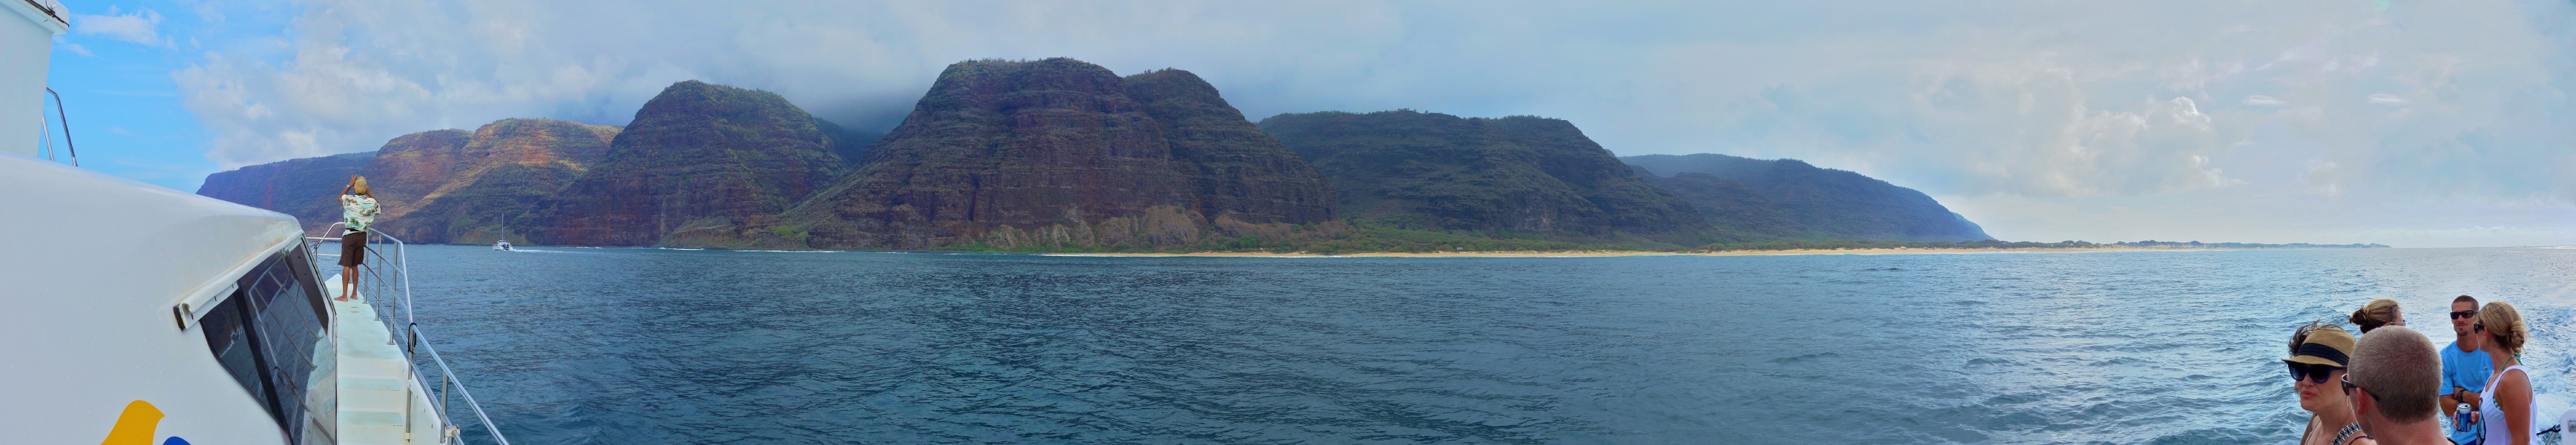 Southern end of Napali Coast near Polihale Beach (right center)